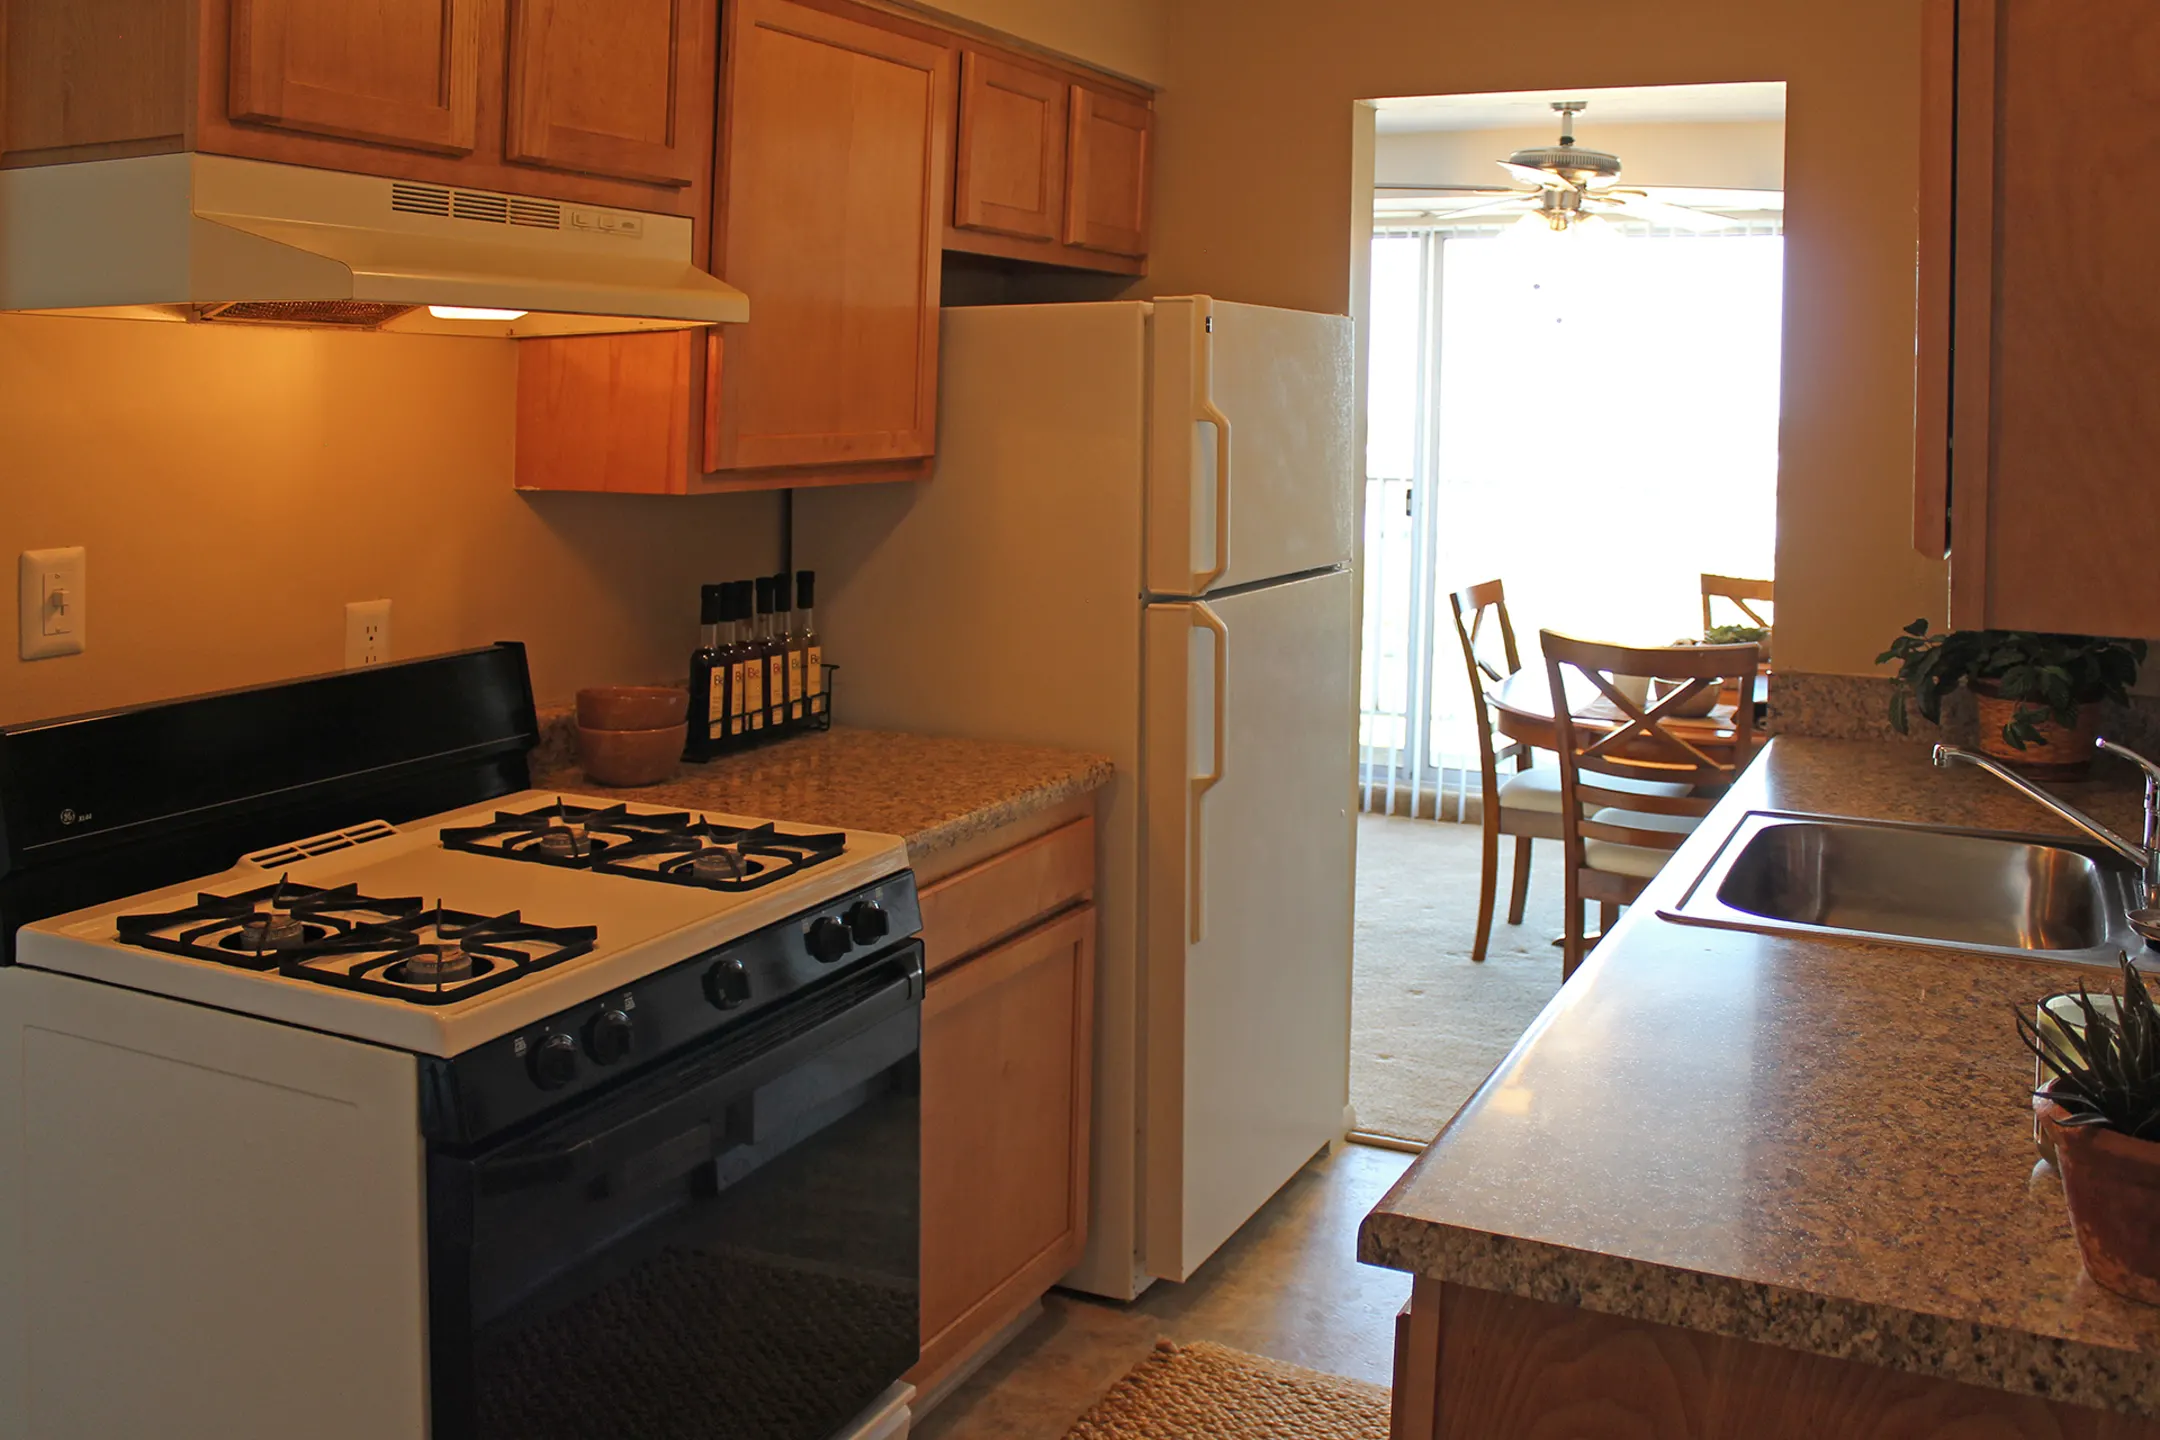 Kitchen - Willoughby Hills Towers - Willoughby Hills, OH